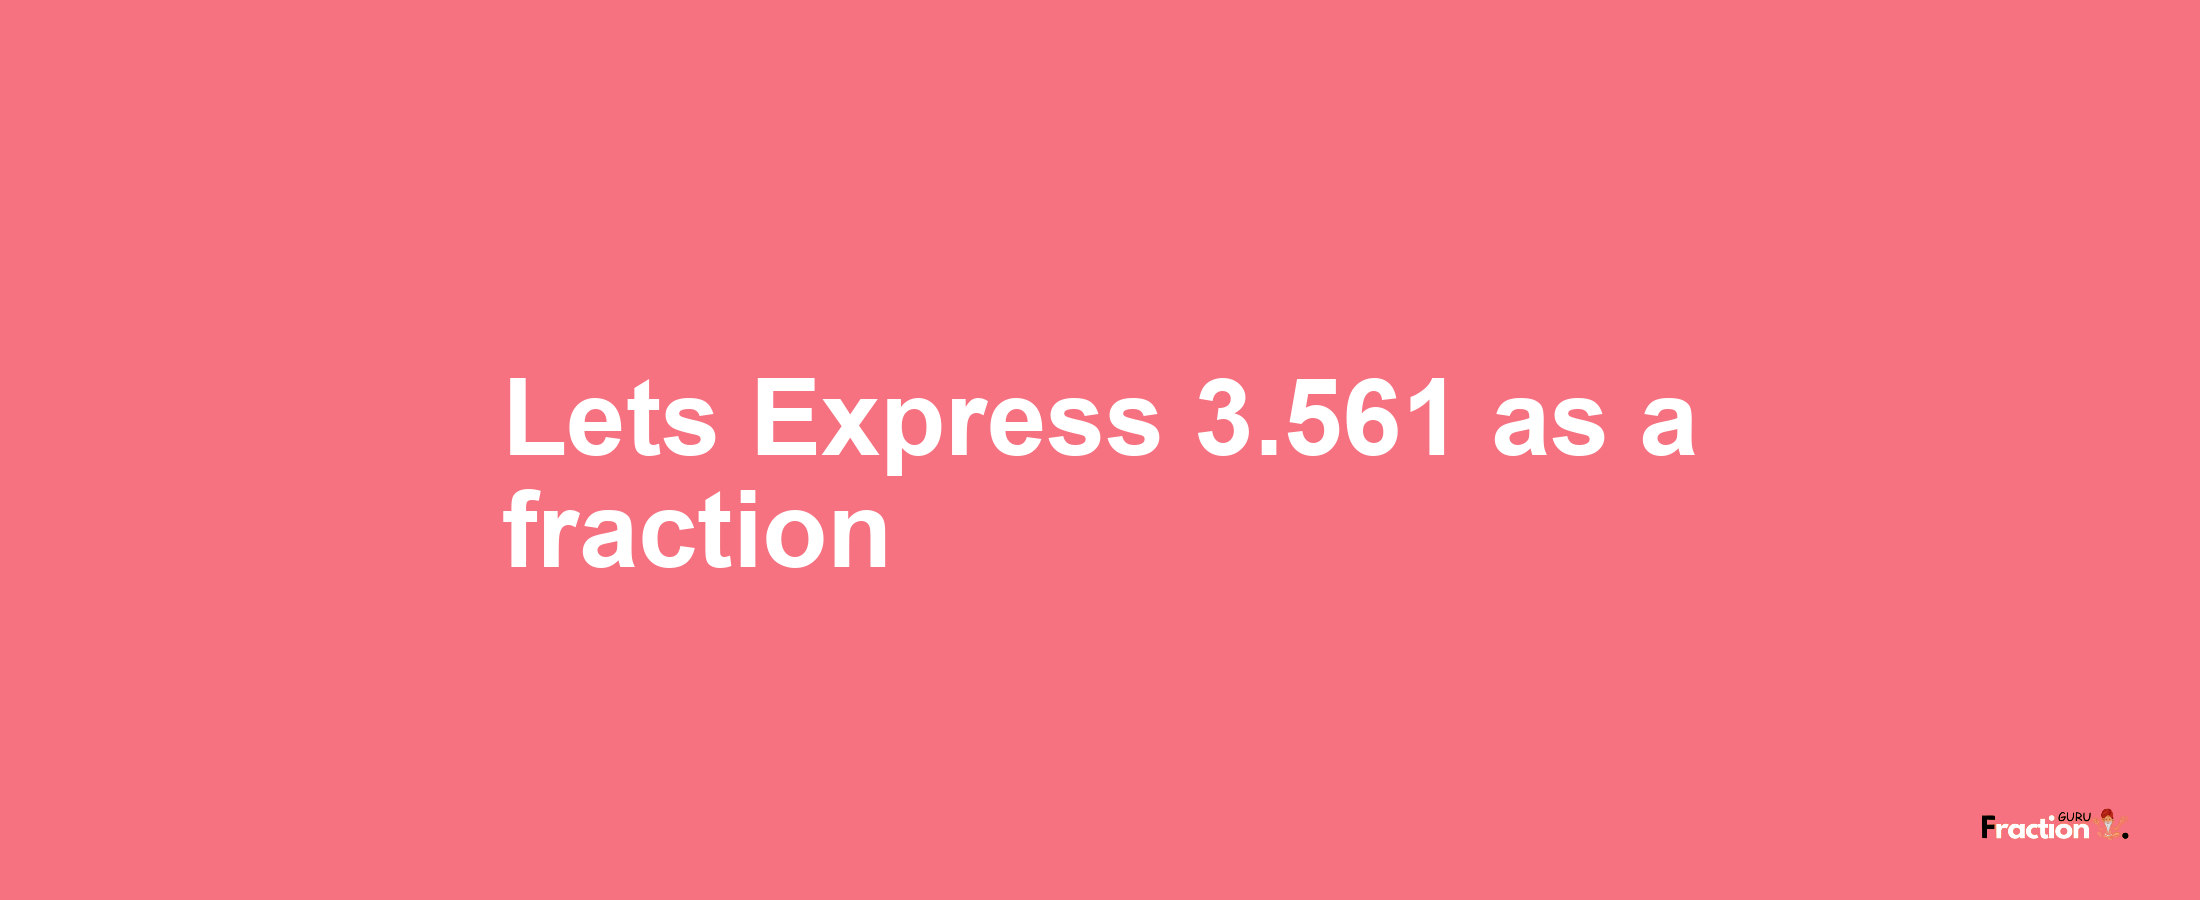 Lets Express 3.561 as afraction